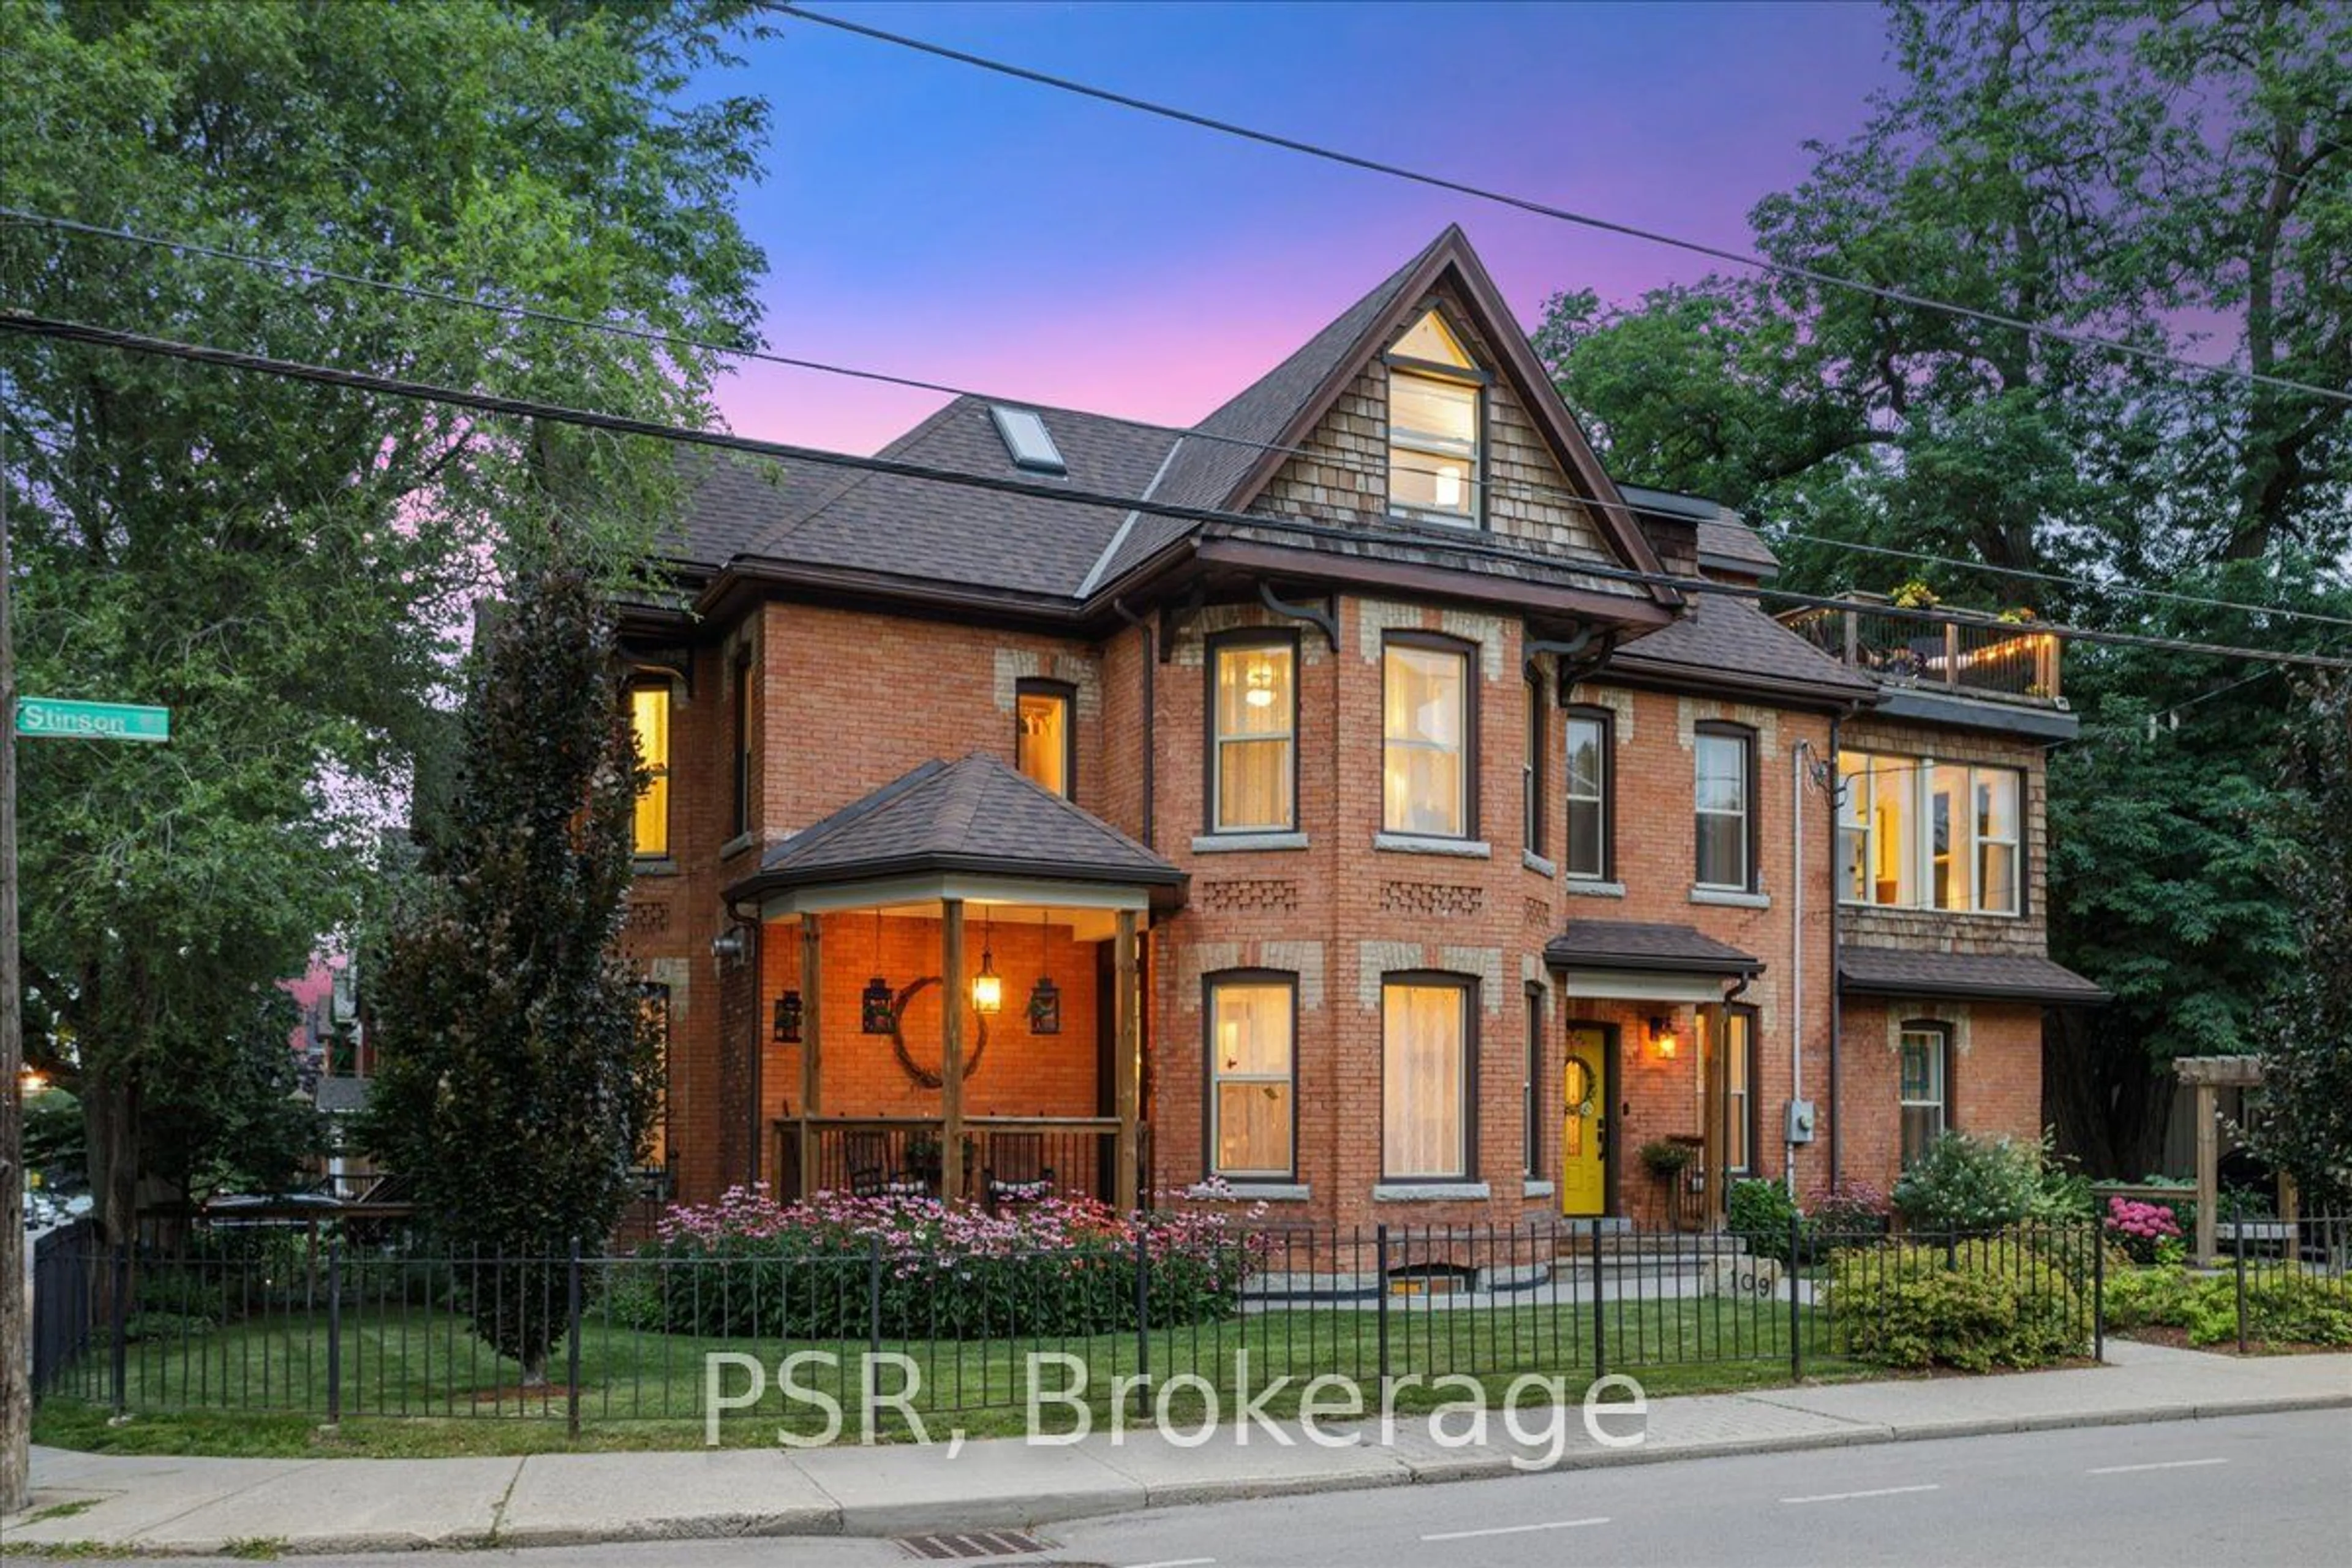 Home with brick exterior material for 109 Ontario Ave, Hamilton Ontario L8N 2X1